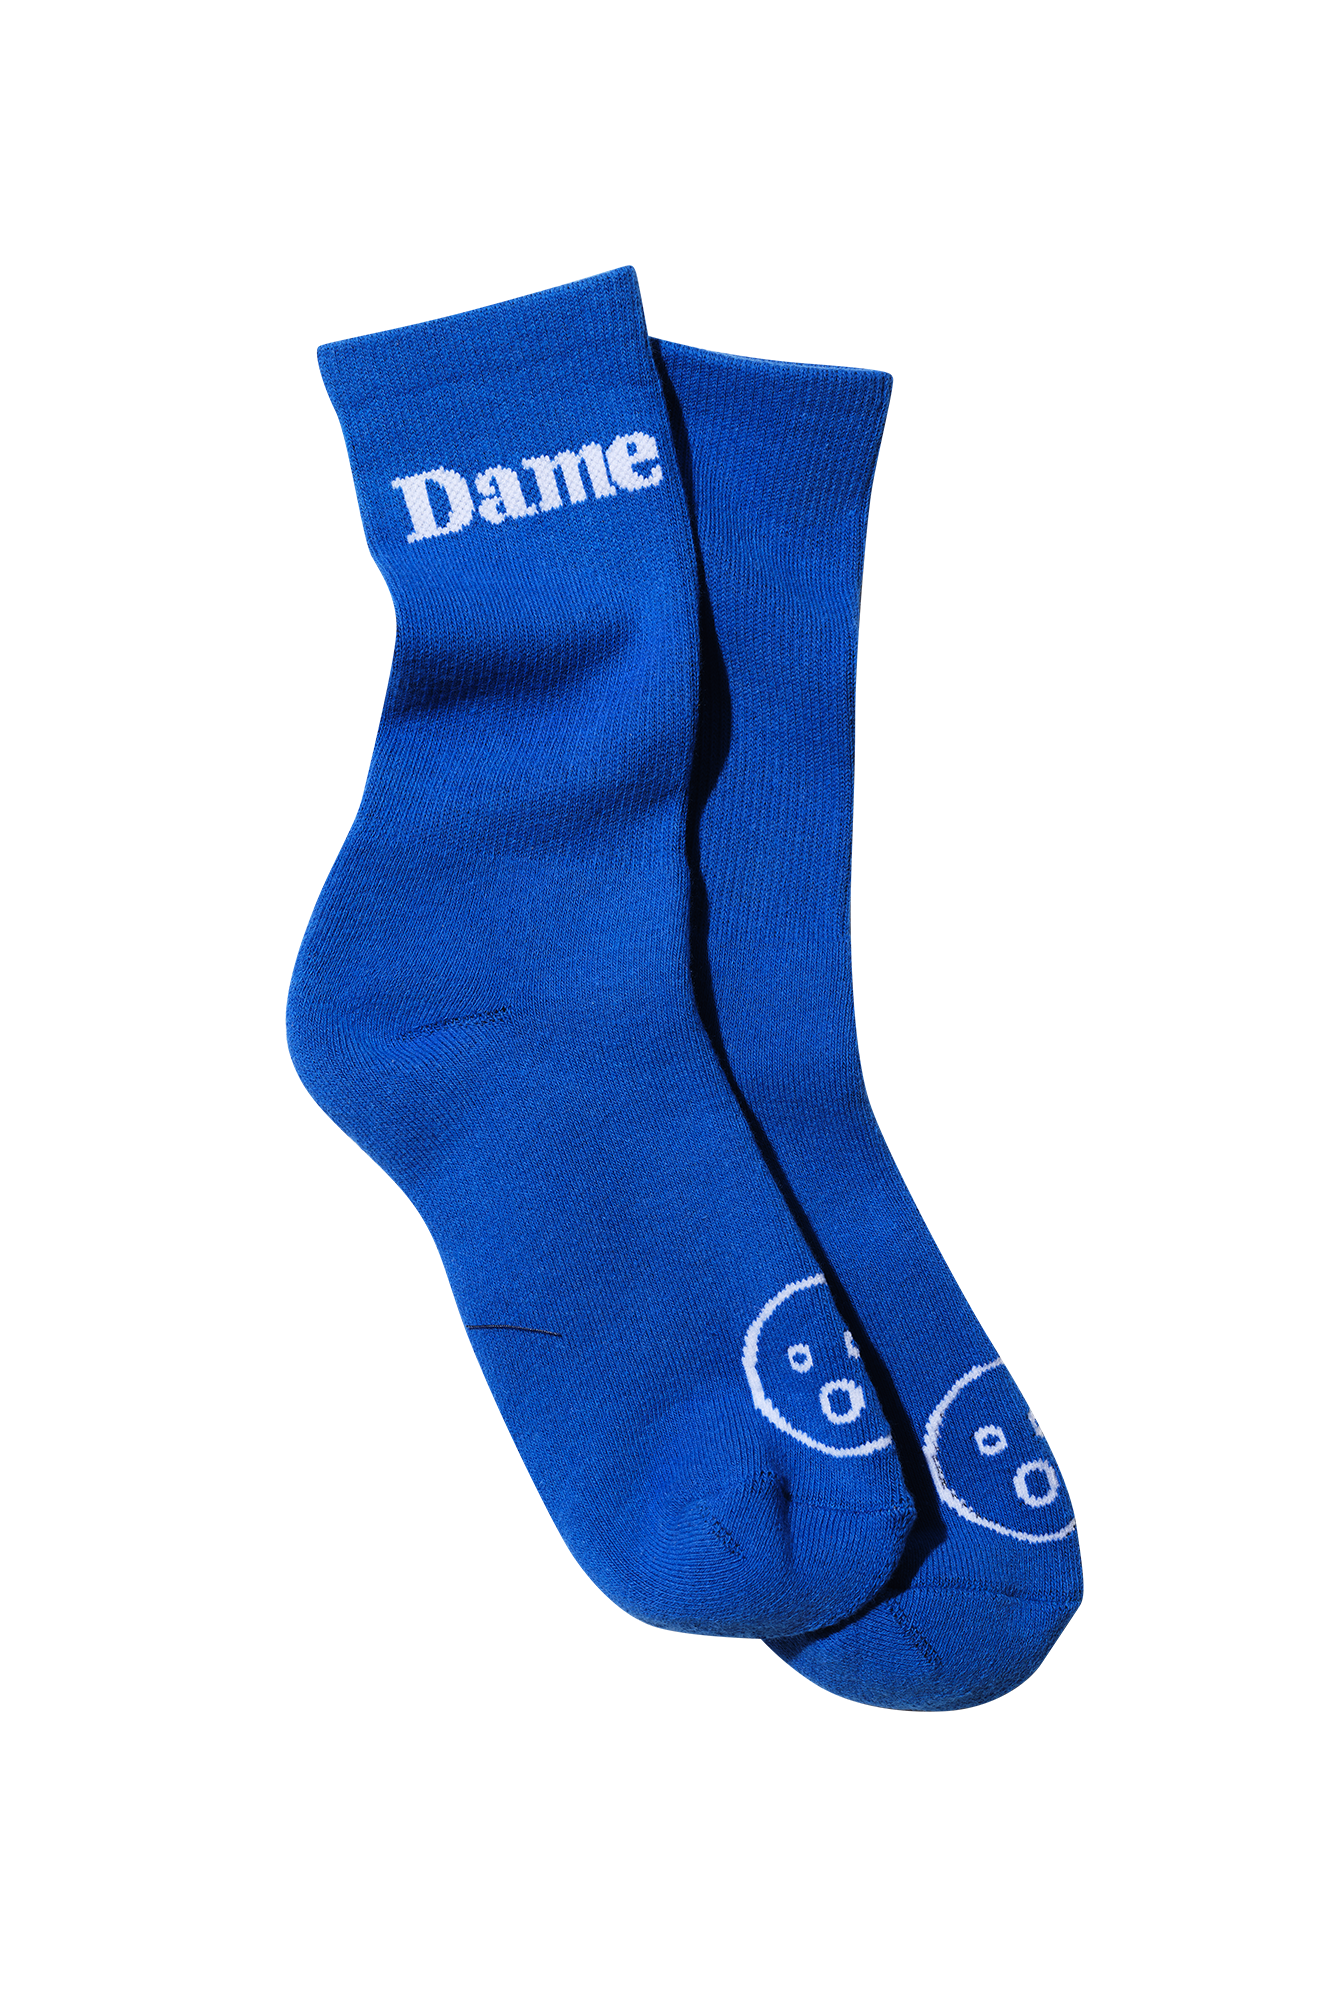 Socks Dame Products image pic